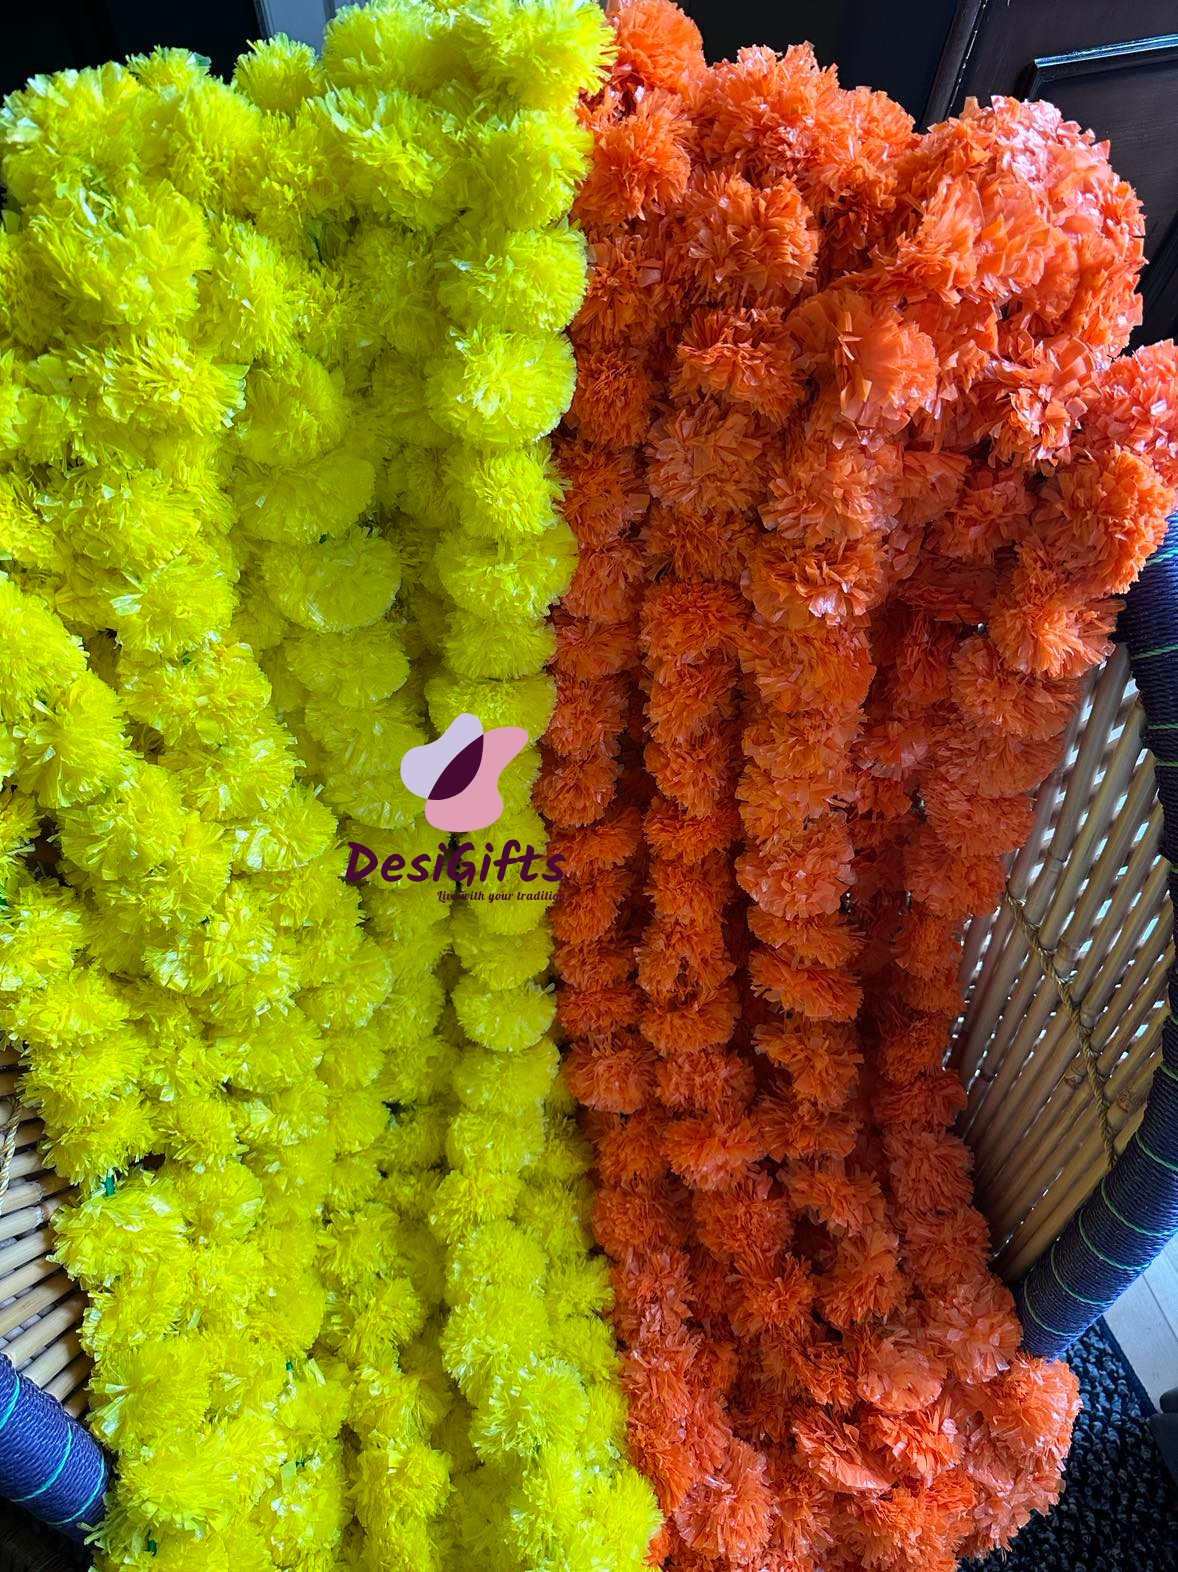 4-5Feet Long Artificial Marigold Flower Strings, Garland for Pooja, Festival, Hanging Decor, Set of 2, HDR-1129